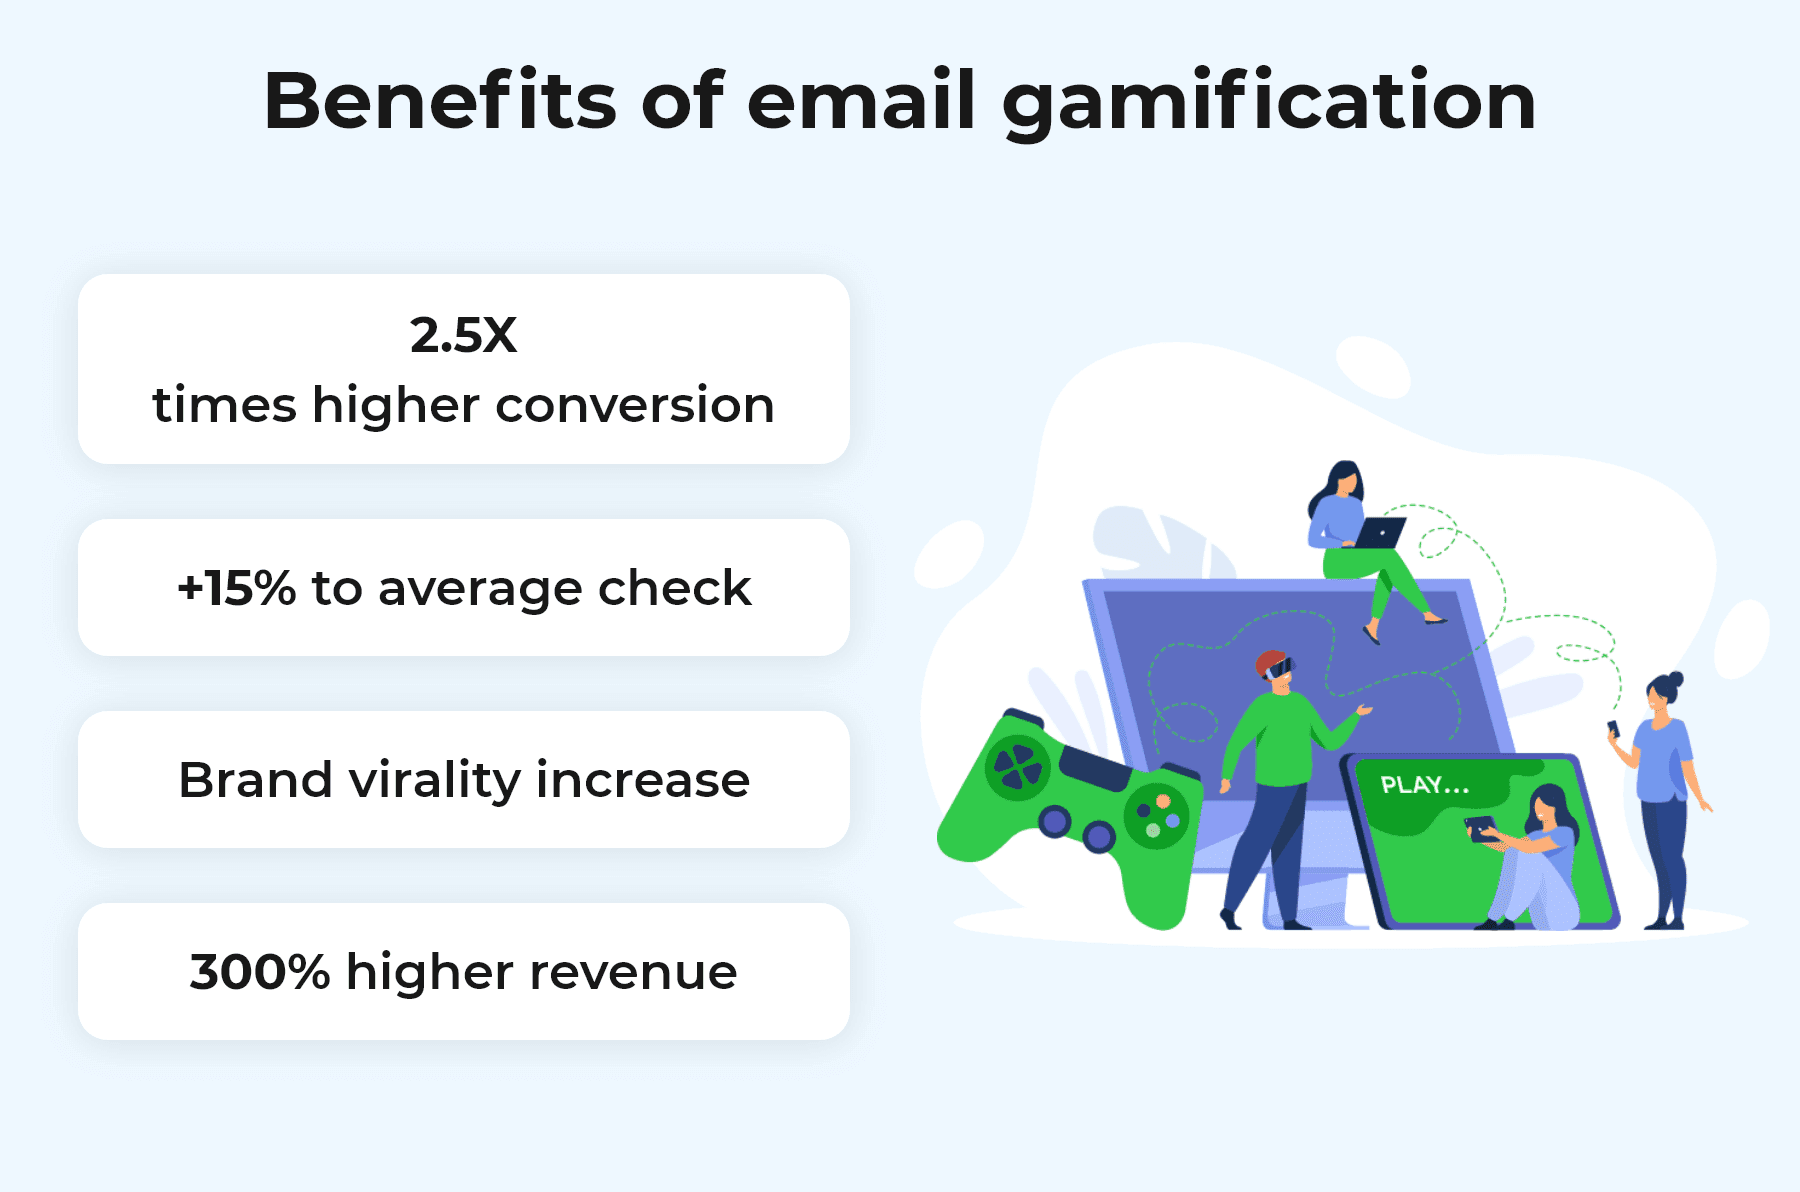 Gamification as Email Marketing Trend 2022_EN